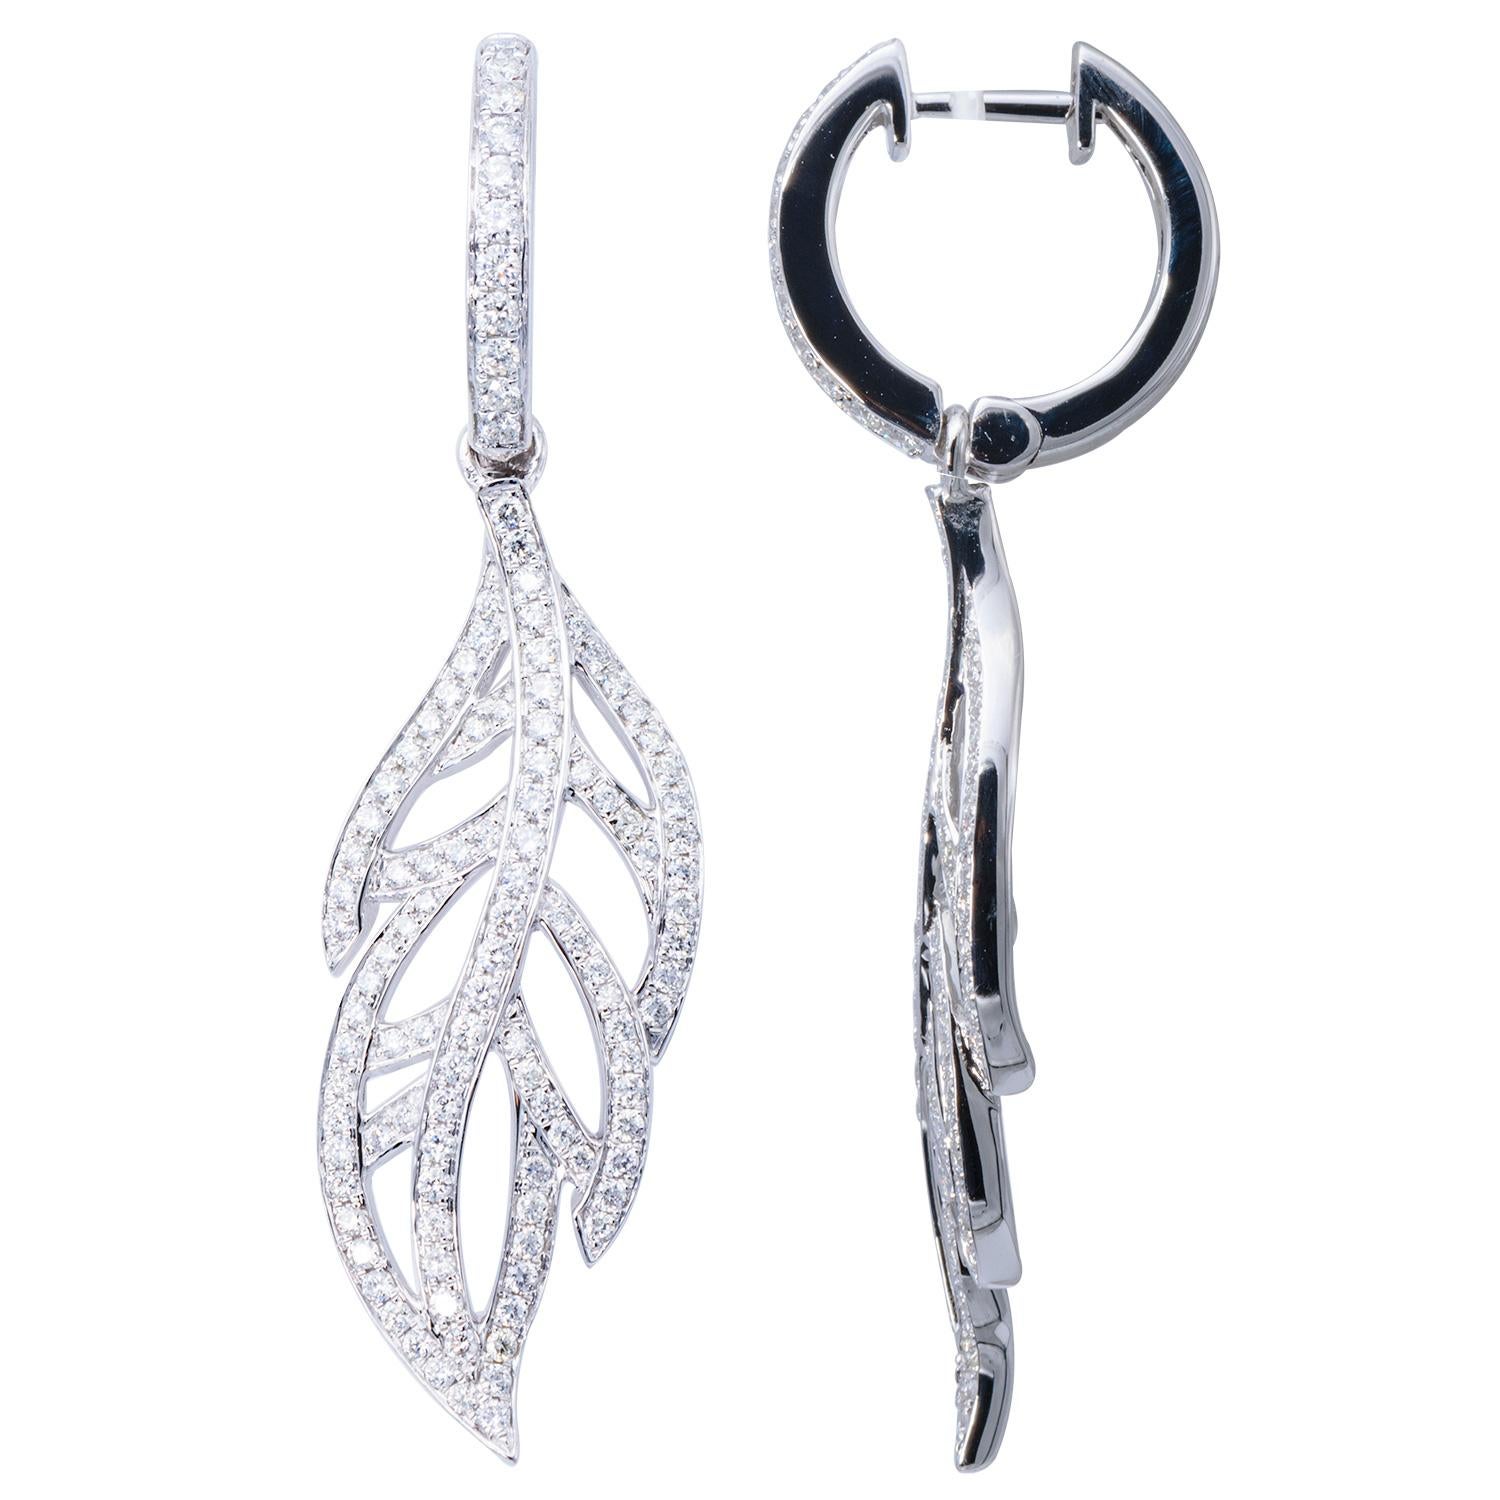 Perfect for fall or all year round these leaf shaped dangling earrings are a unique and beautiful accessory. These gorgeous leaves are made from 226 VS2, G color diamonds that are expertly set in 7.7 grams of 18 karat white gold. They hang from a